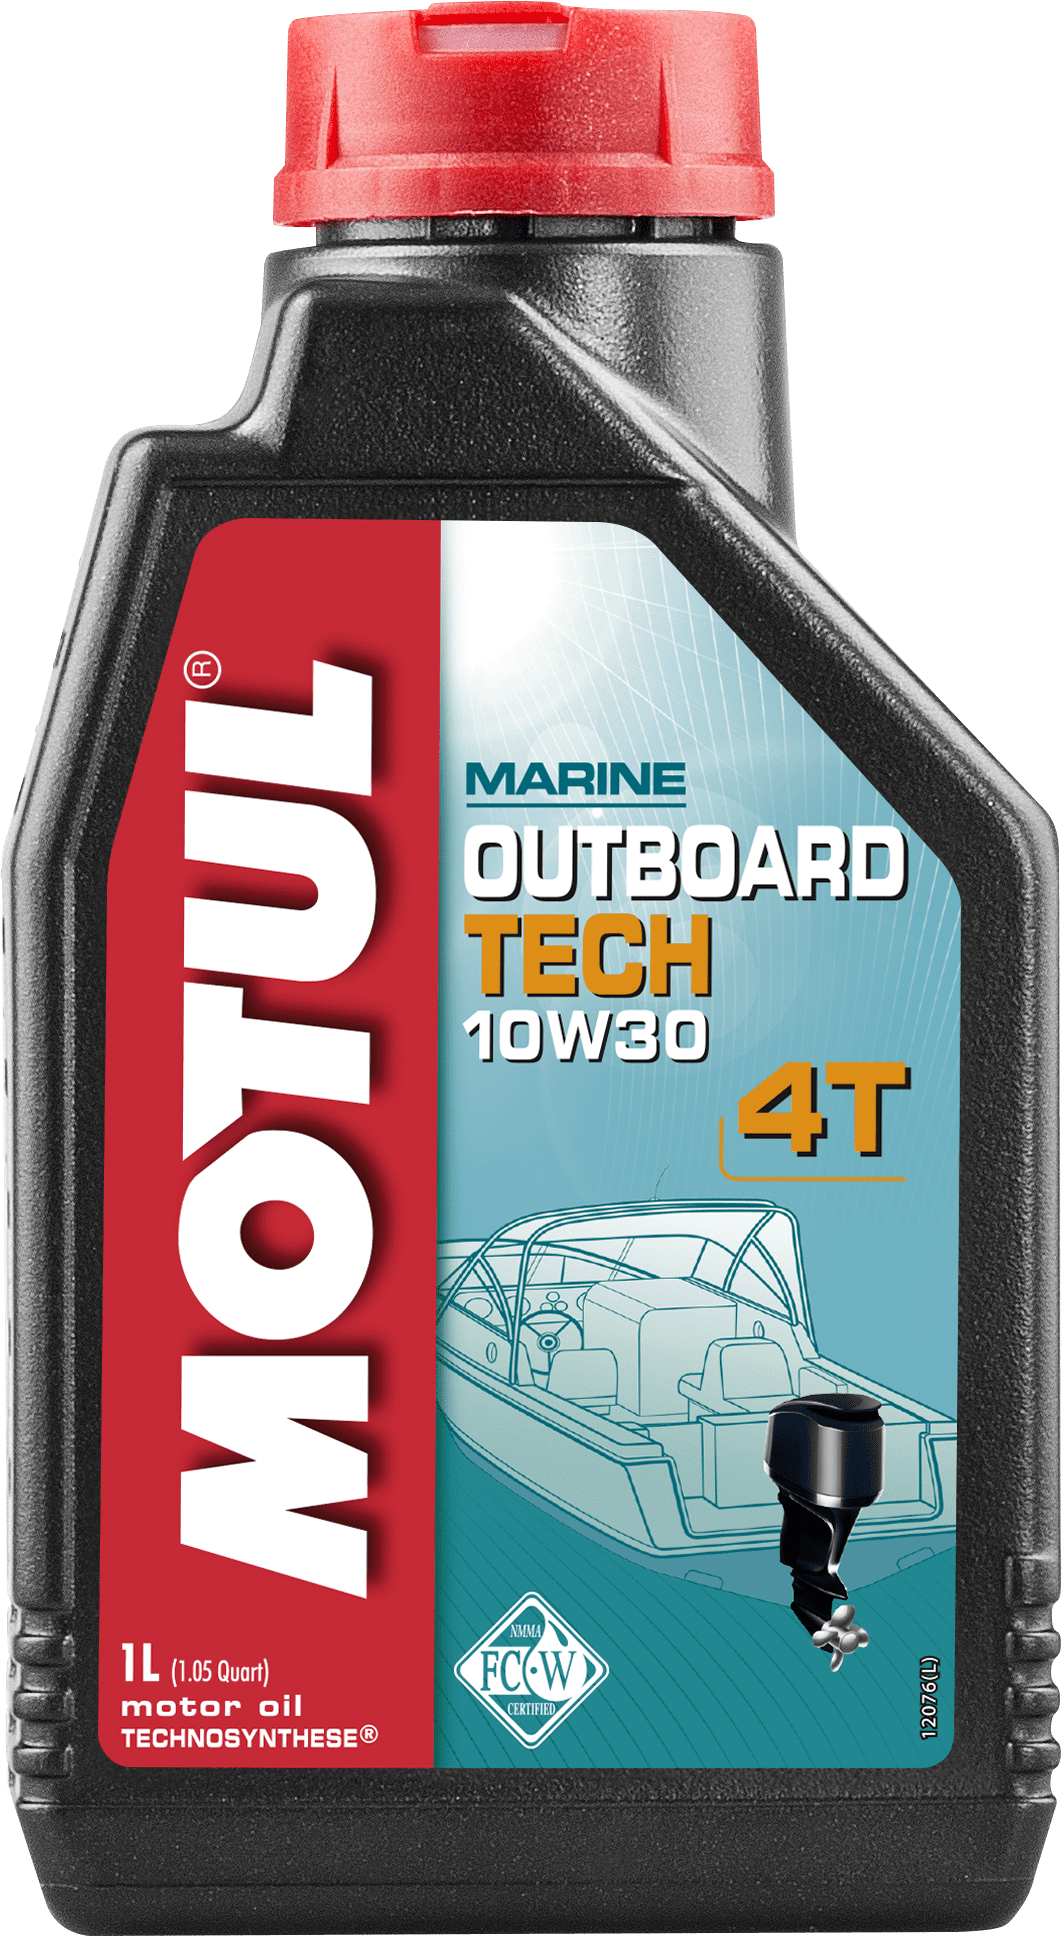 106453-1 Technosynthese® lubricant for 4-Stroke Outboard or sterndrive engines calling for NMMA FC-W lubricants.